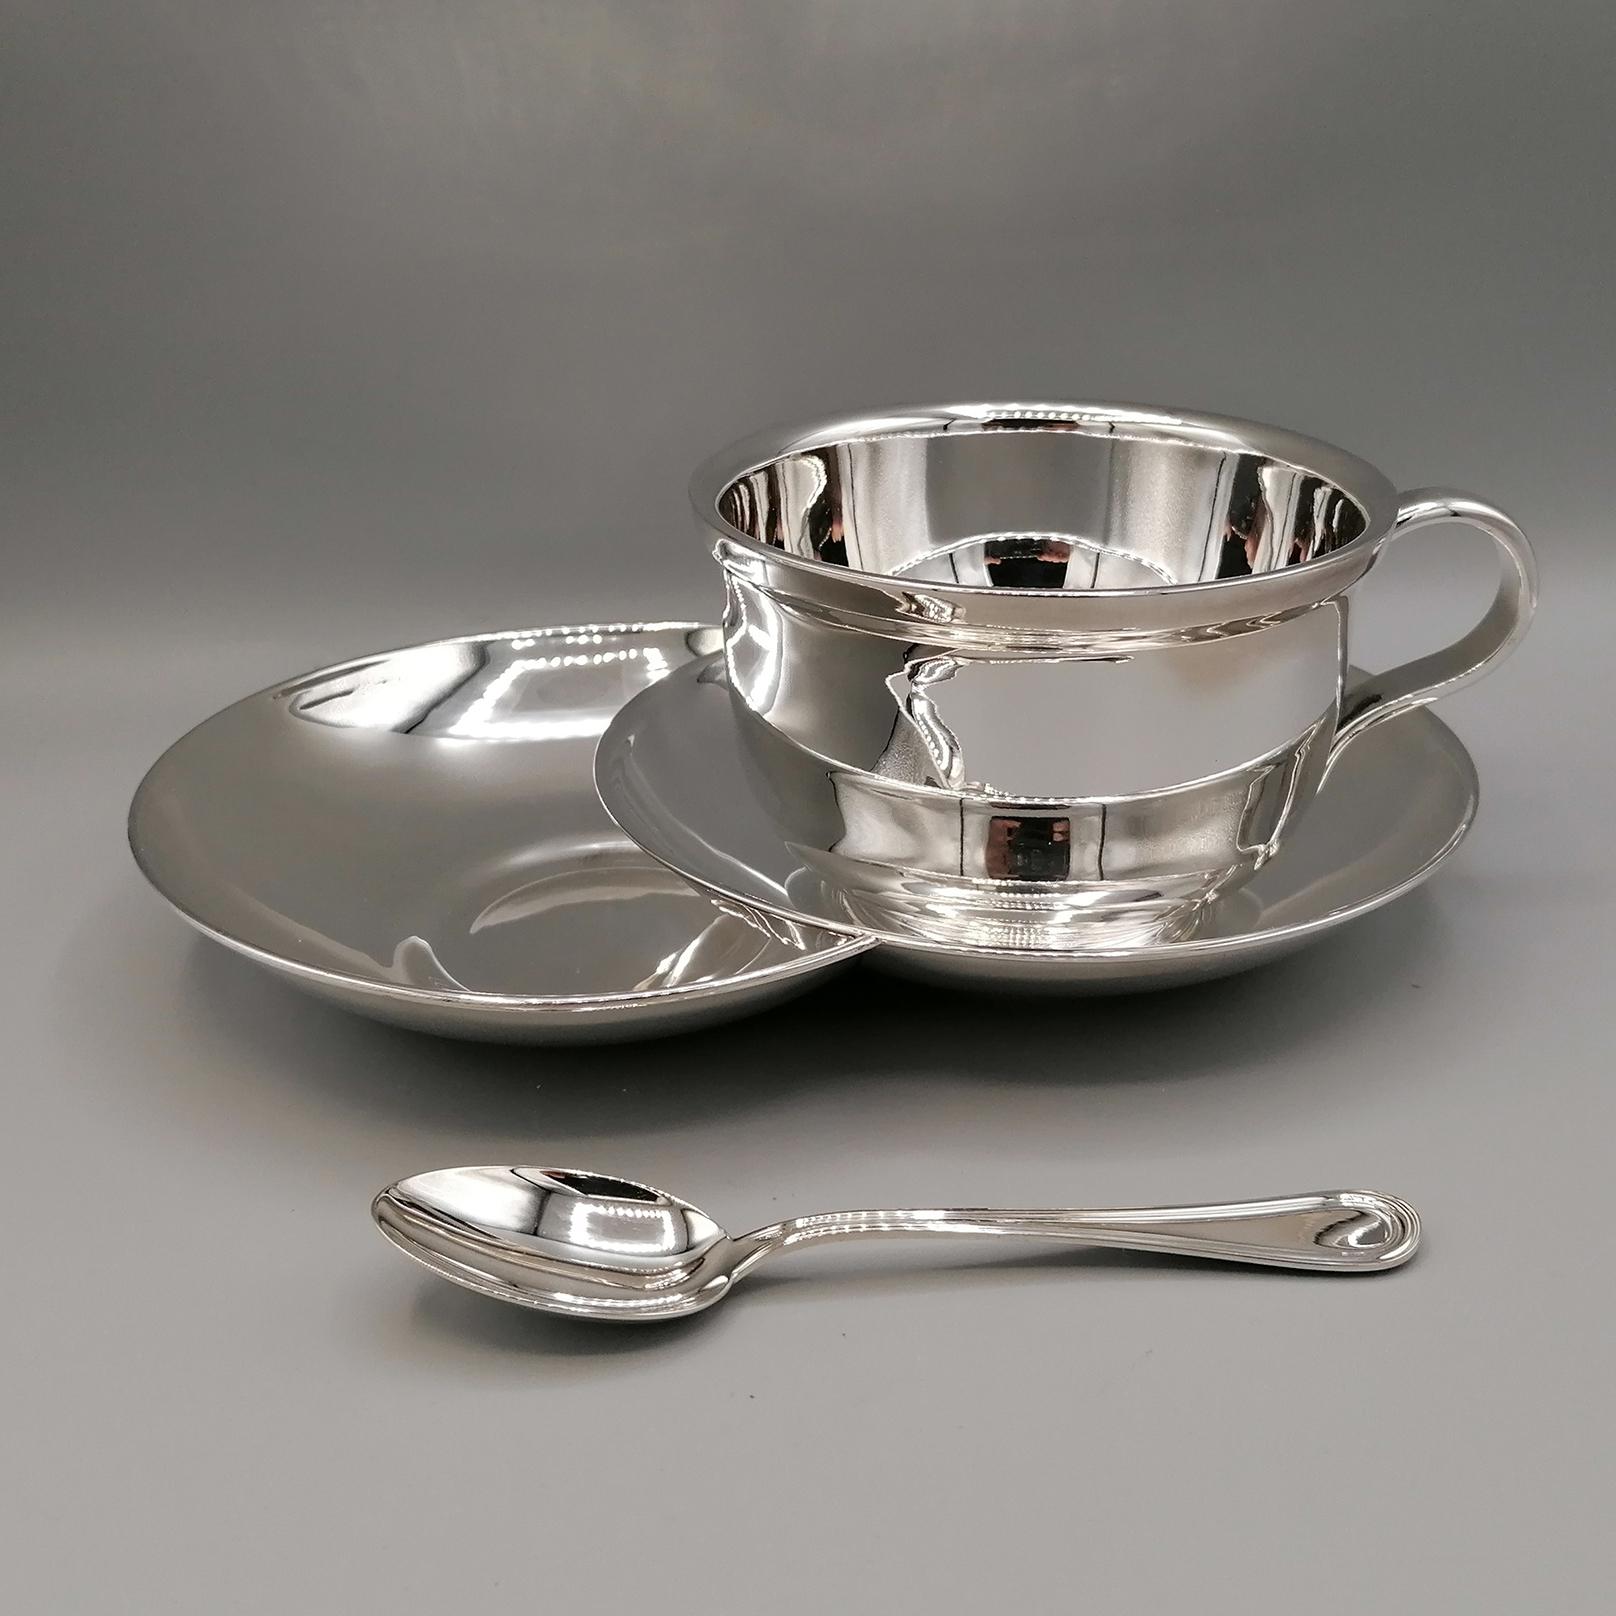 Breakfast cup in 800 solid silver with double saucer.
The cup was made from the double-chamber silver sheet, to make sure that the poured tea or coffee stays at temperature for a long time.
The cup body is completely smooth and shaped.
The handle,